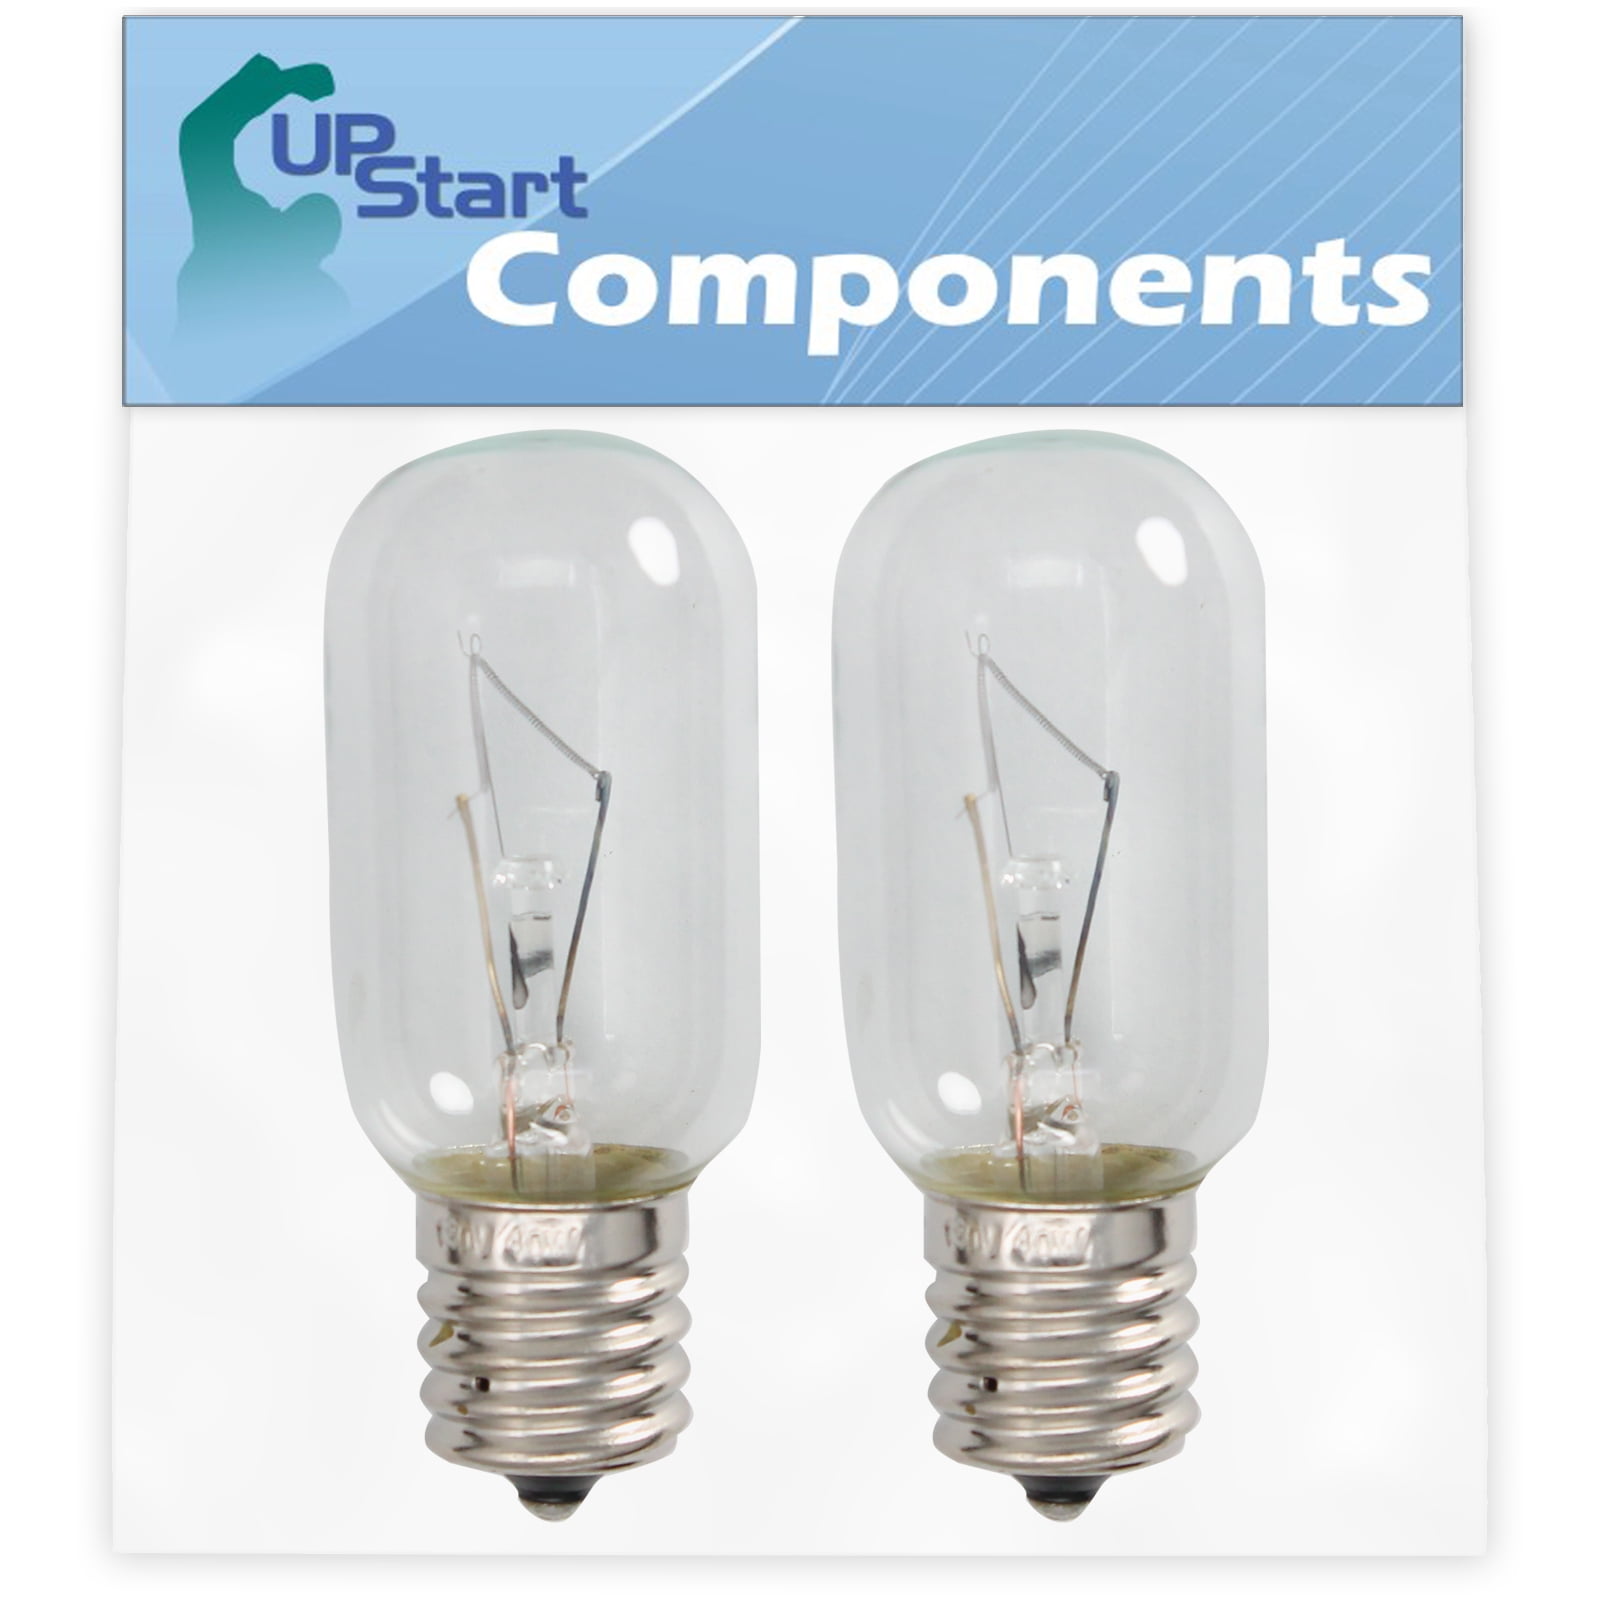 2-Pack 4713-001013 Microwave Light Bulb Replacement for Kenmore / Sears